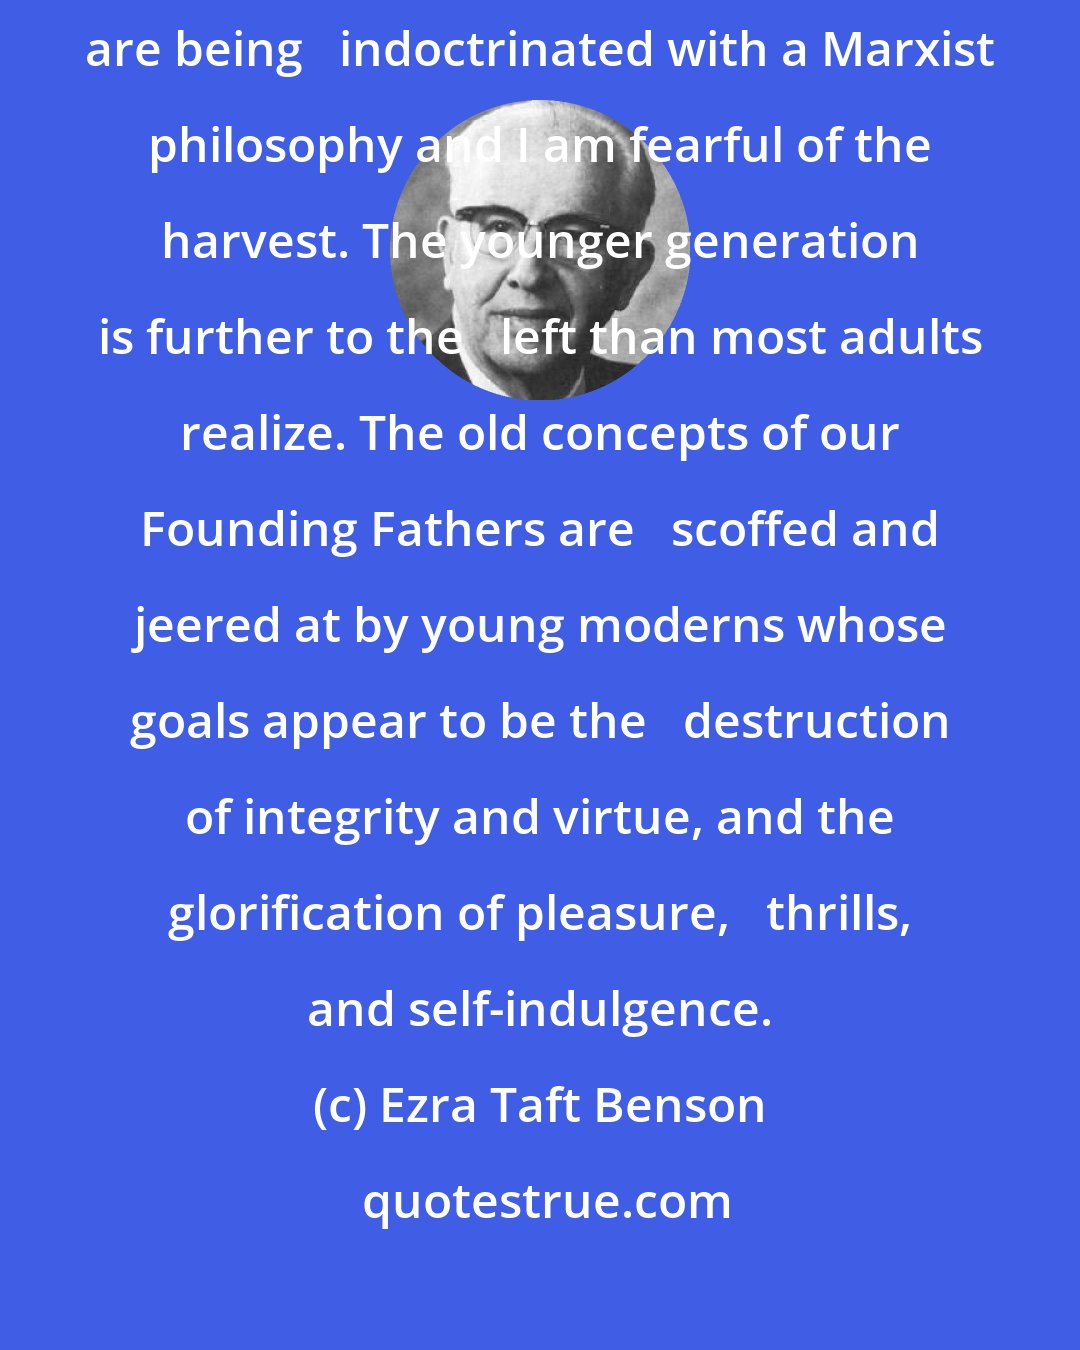 Ezra Taft Benson: From the   5th grade through the 4th year of college, our young people are being   indoctrinated with a Marxist philosophy and I am fearful of the harvest. The younger generation is further to the   left than most adults realize. The old concepts of our Founding Fathers are   scoffed and jeered at by young moderns whose goals appear to be the   destruction of integrity and virtue, and the glorification of pleasure,   thrills, and self-indulgence.